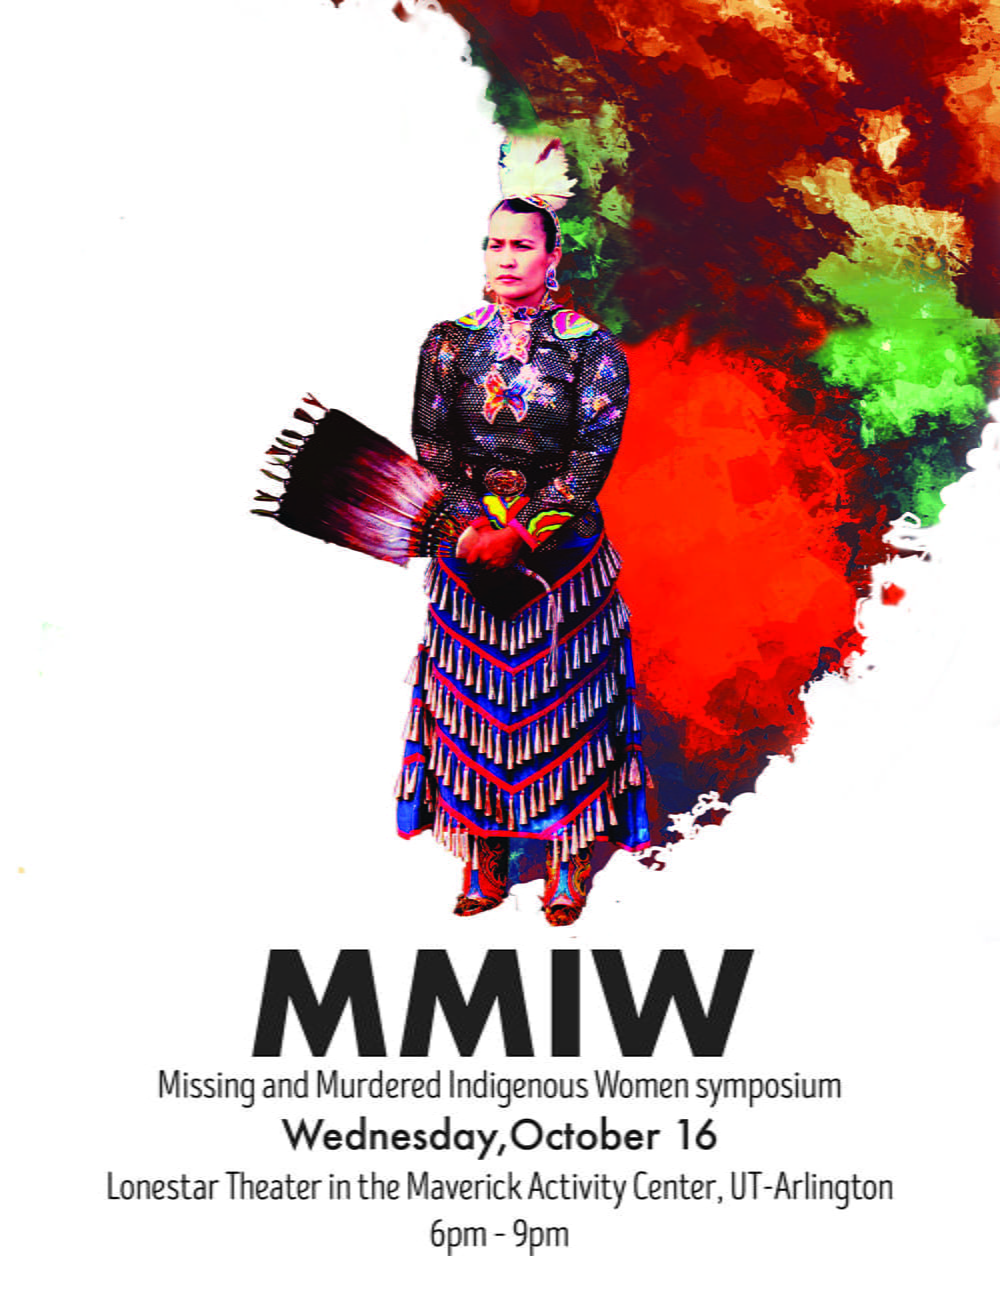 Missing and Murdered Indigenous Woman symposium